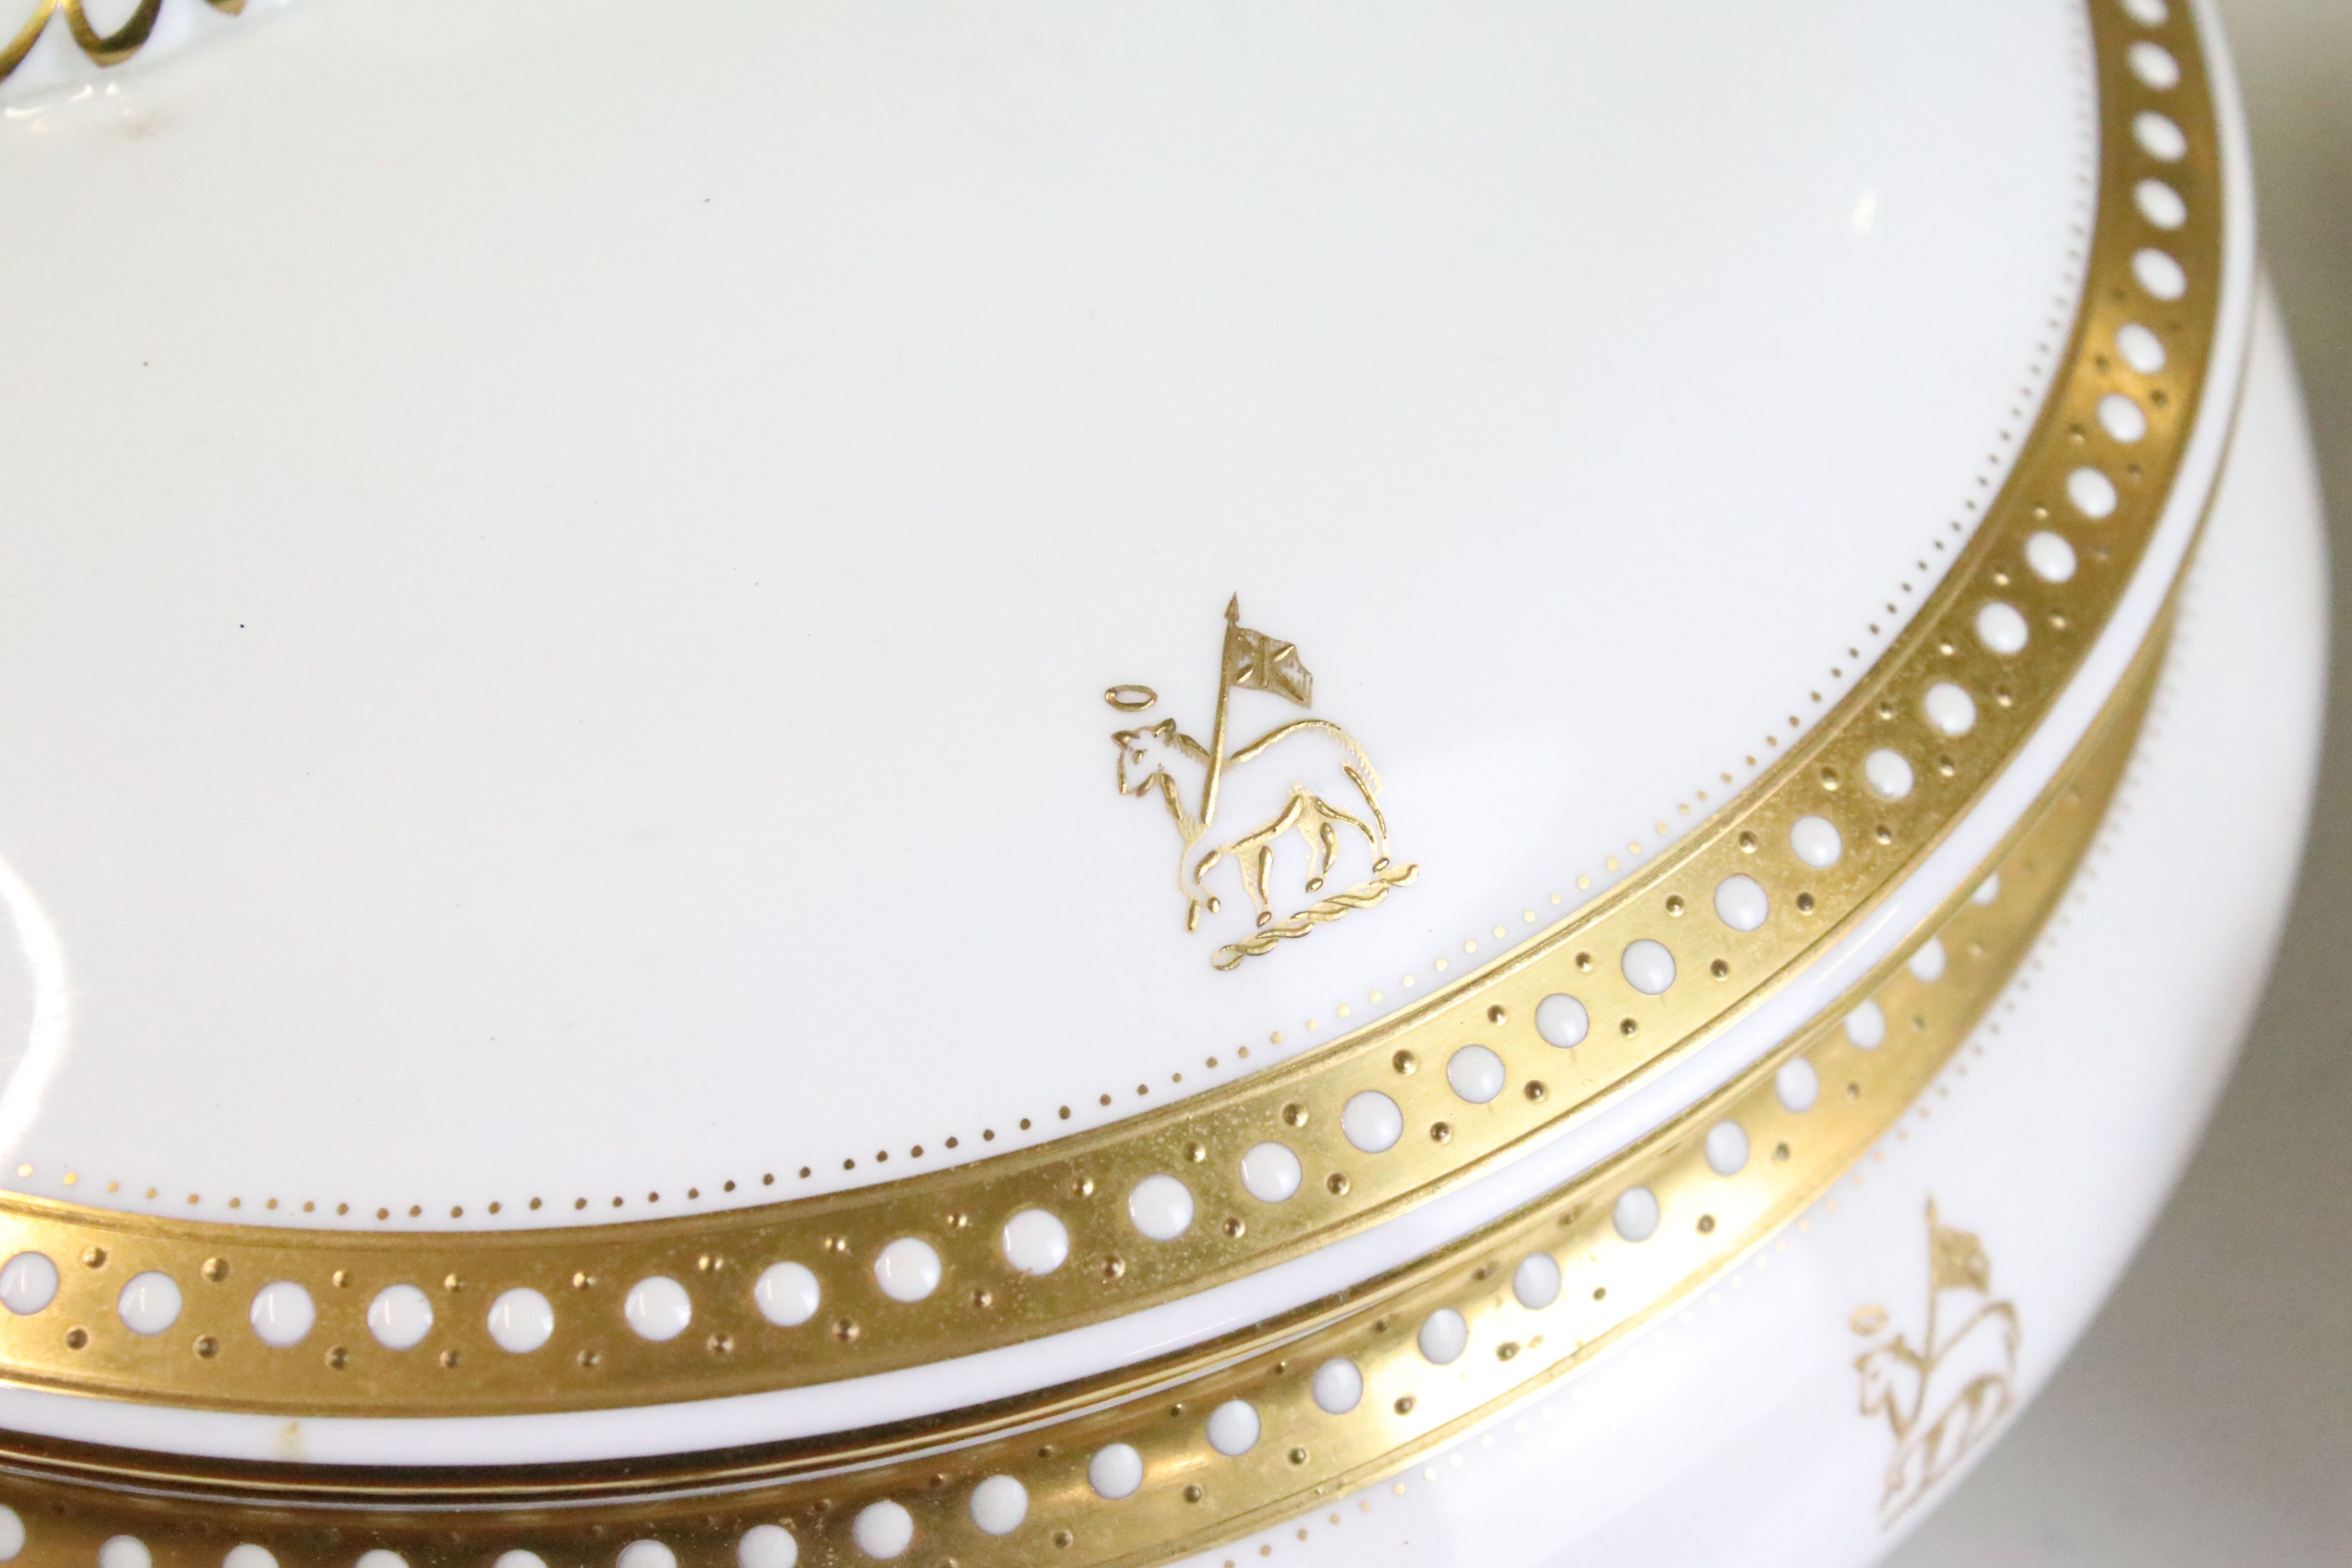 Early 20th Spode dinner service retailed by Thomas Goode & Co Ltd having a white ground with gilt - Image 5 of 6